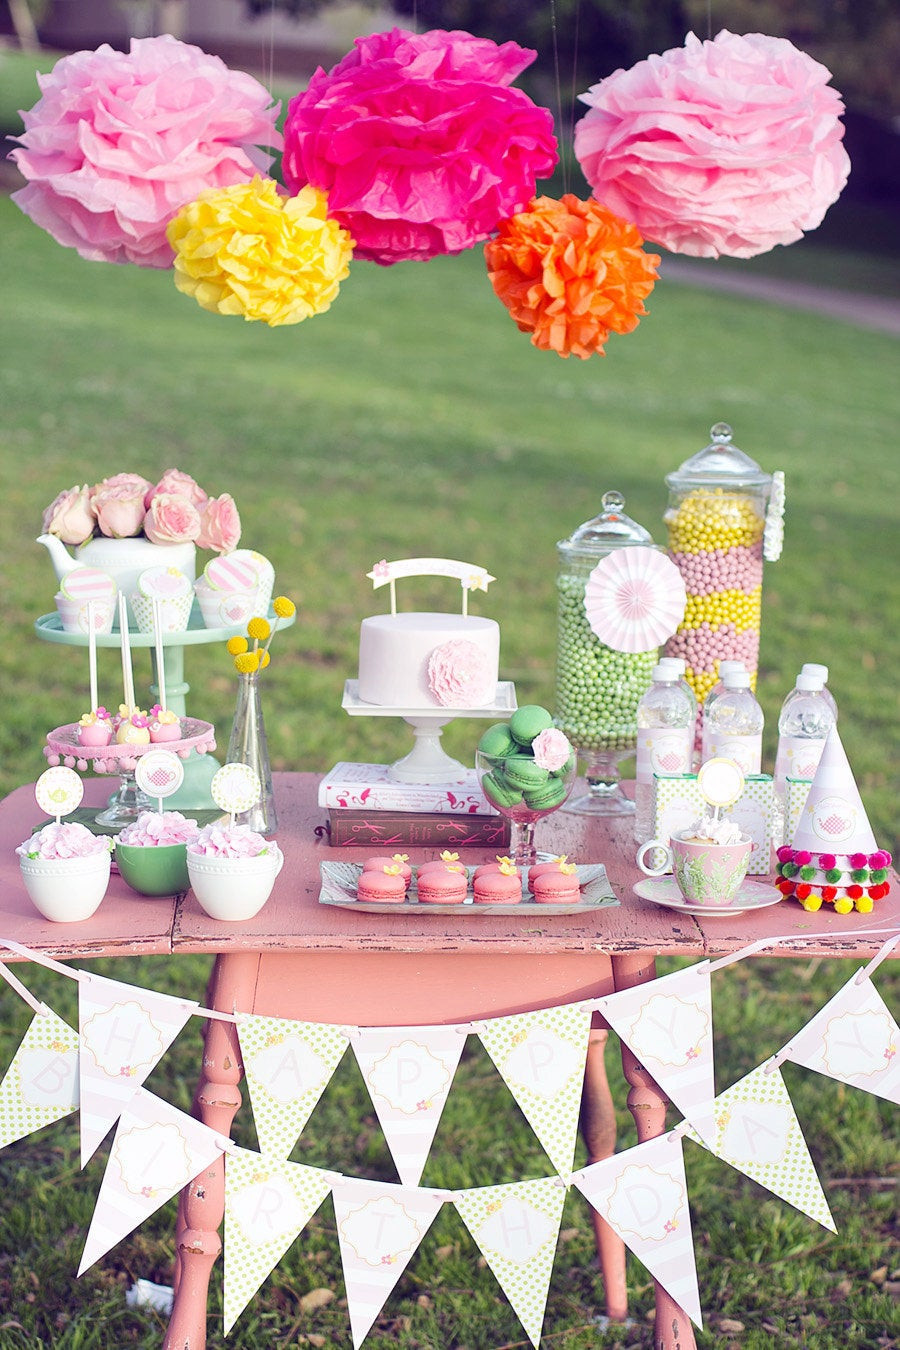 Tea Party Decorating Ideas
 Printable Garden Tea Party Package Featured on Hostess with